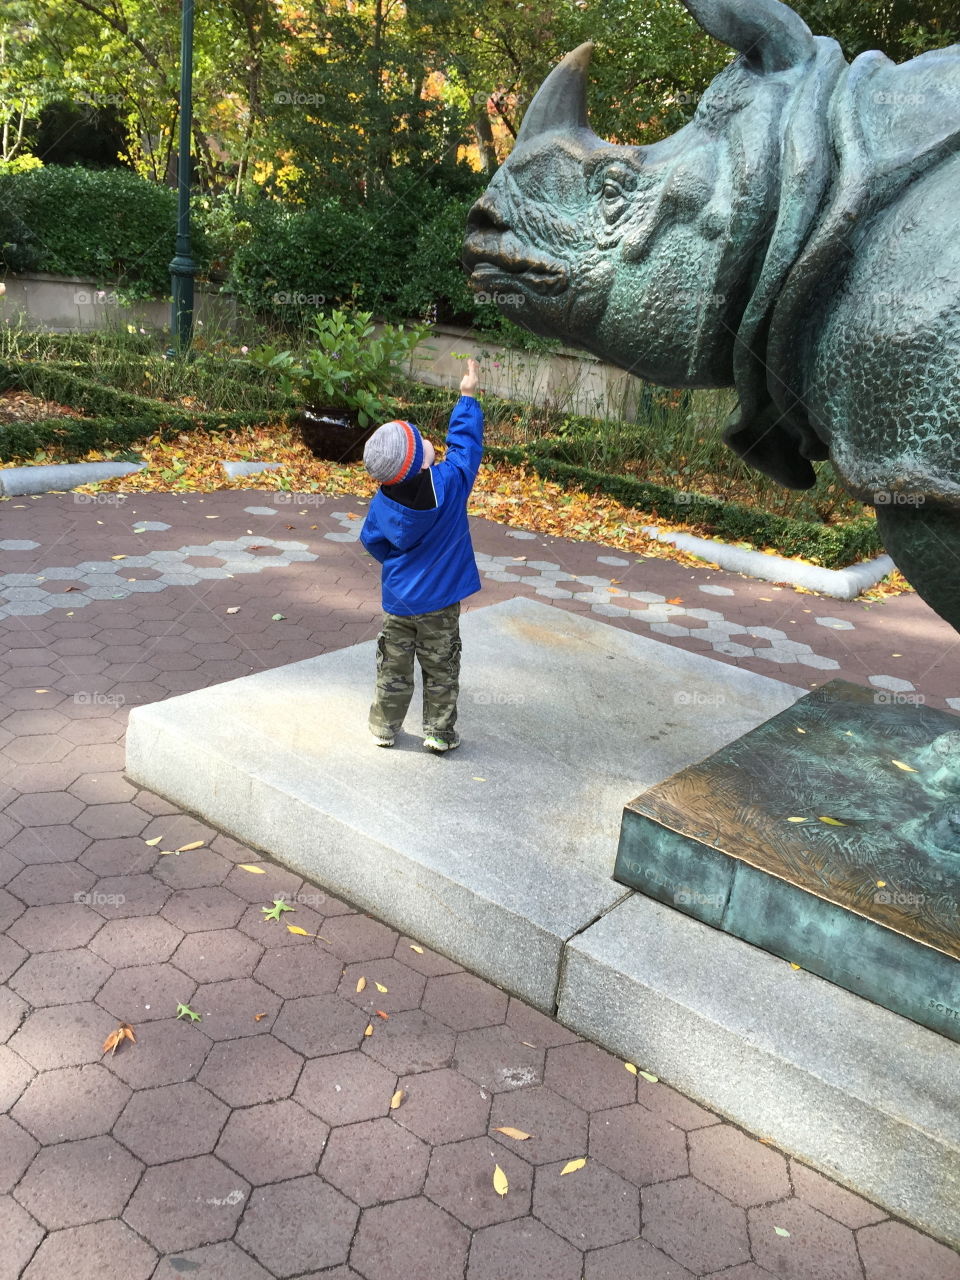 Little boy in a blue jacket and striped hat reaching up to the face of the huge rhino rhinoceros statue at the NYC Bronx Zoo in New York City. 